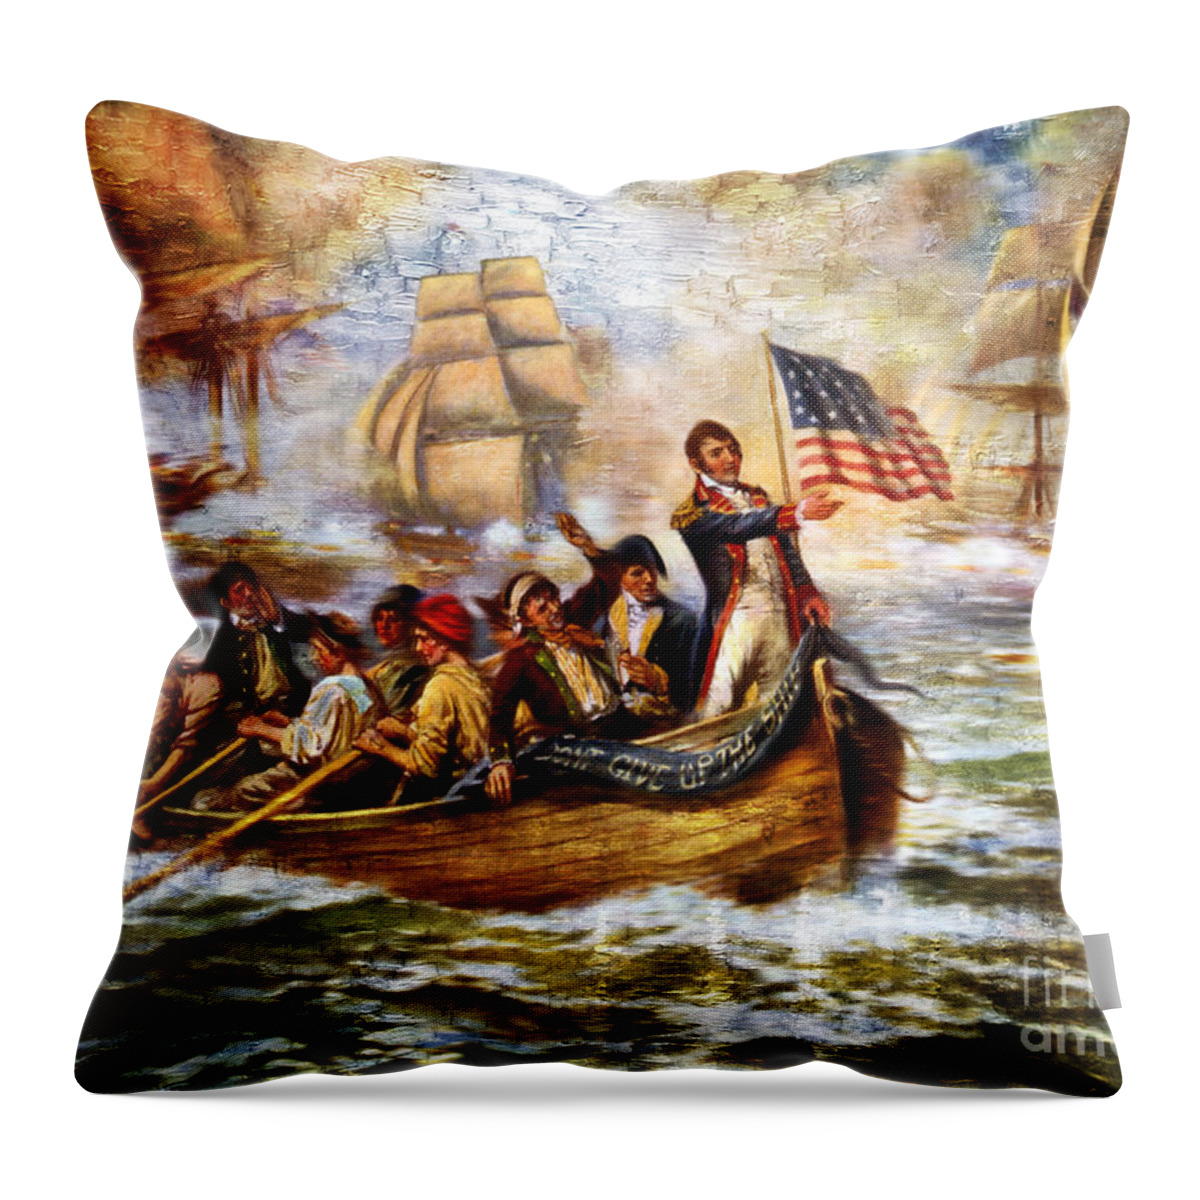 Battle Throw Pillow featuring the painting Battle of Lake Erie by Carlos Diaz